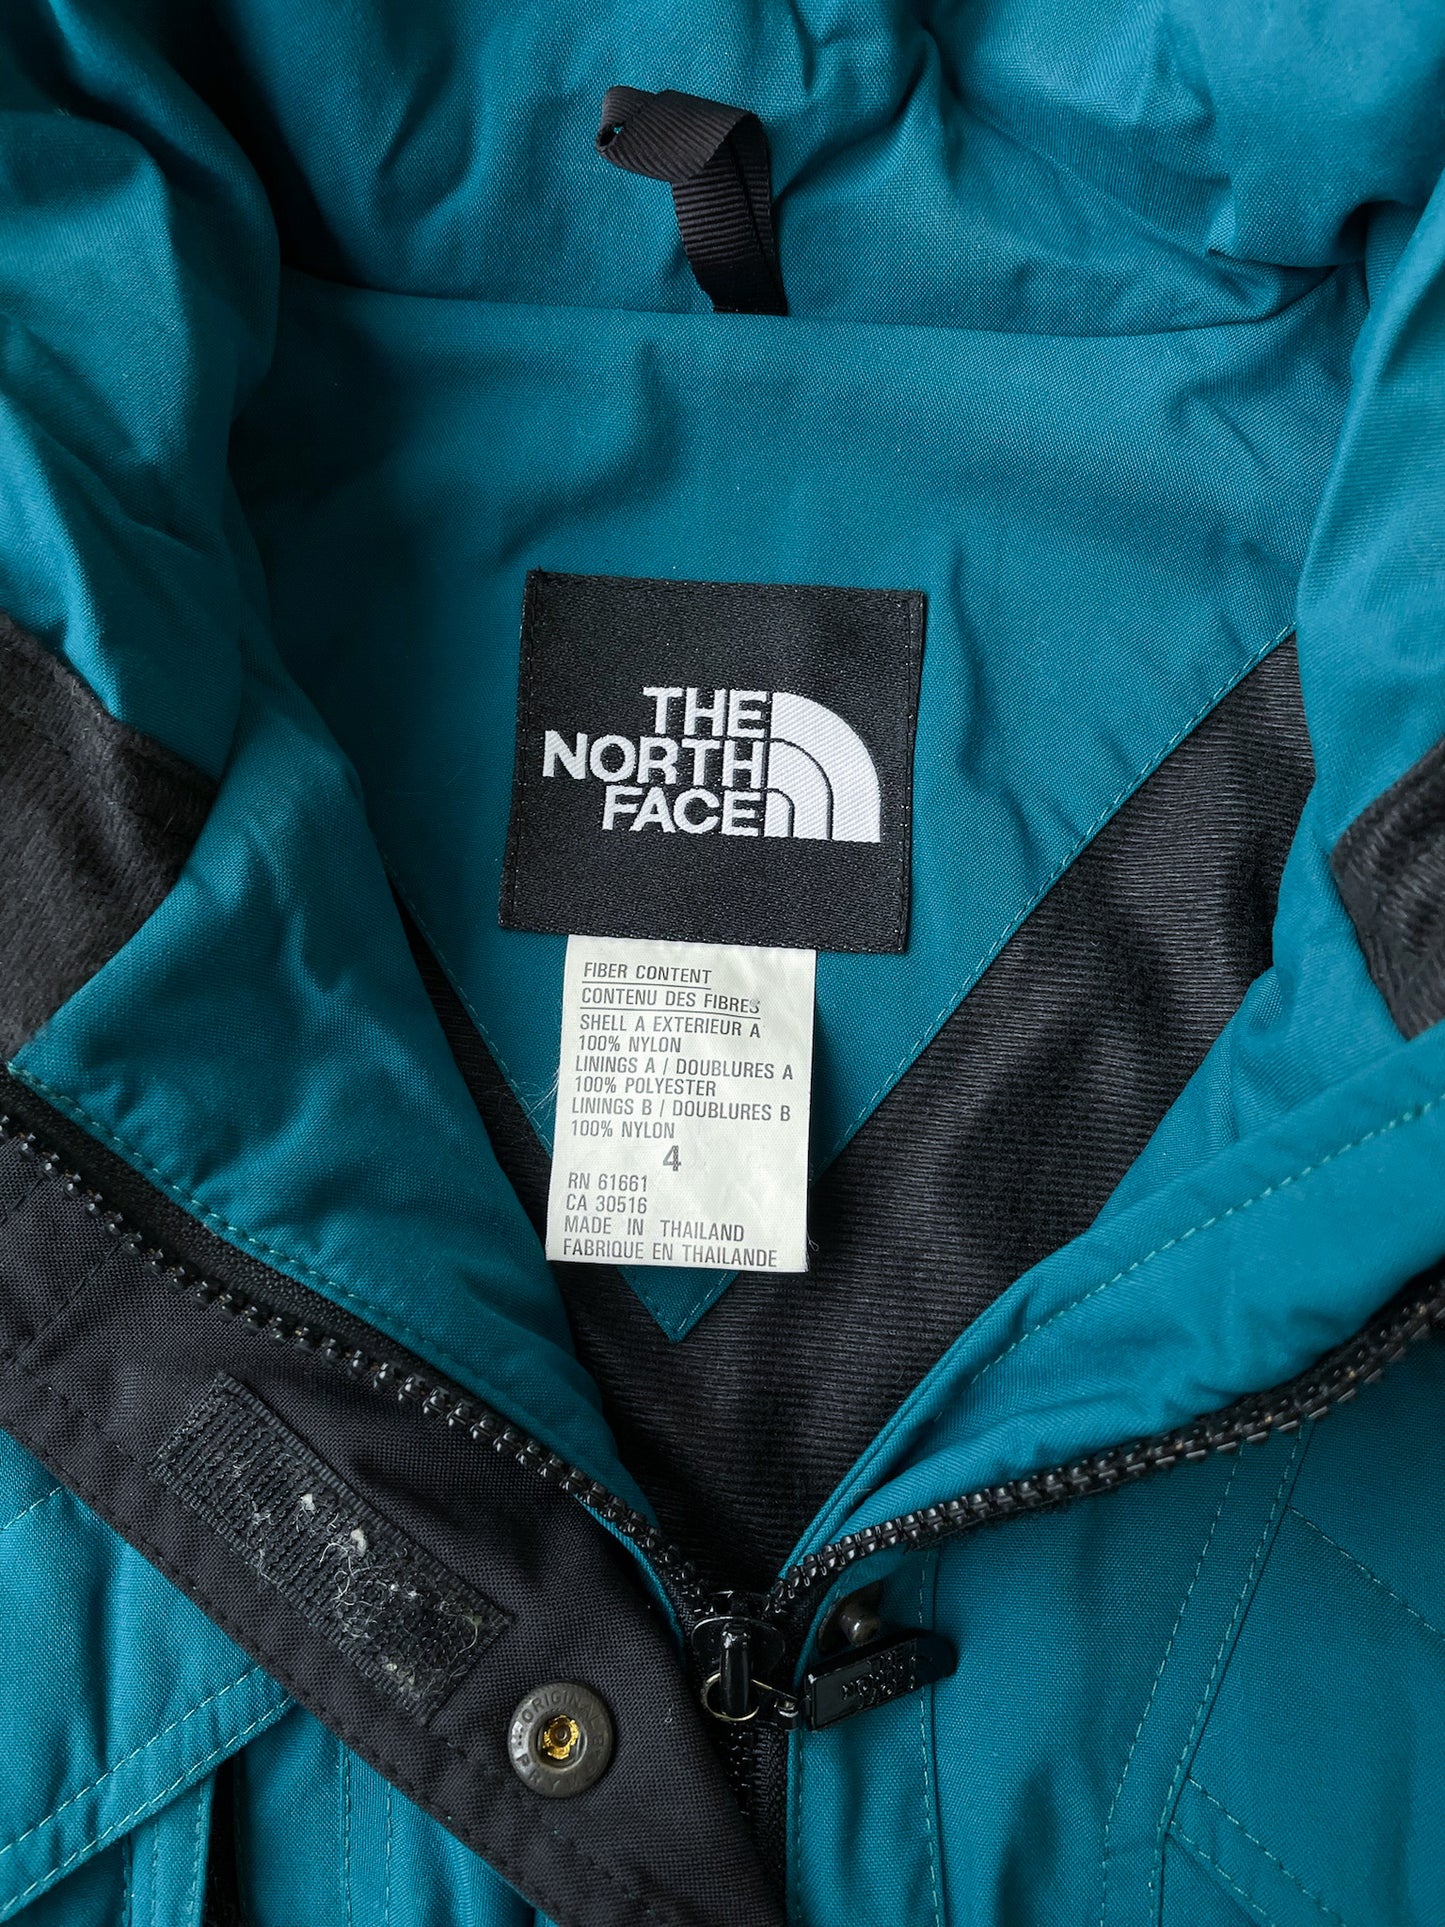 90’s The North Face Extreme Gear Jacket—[S/M]